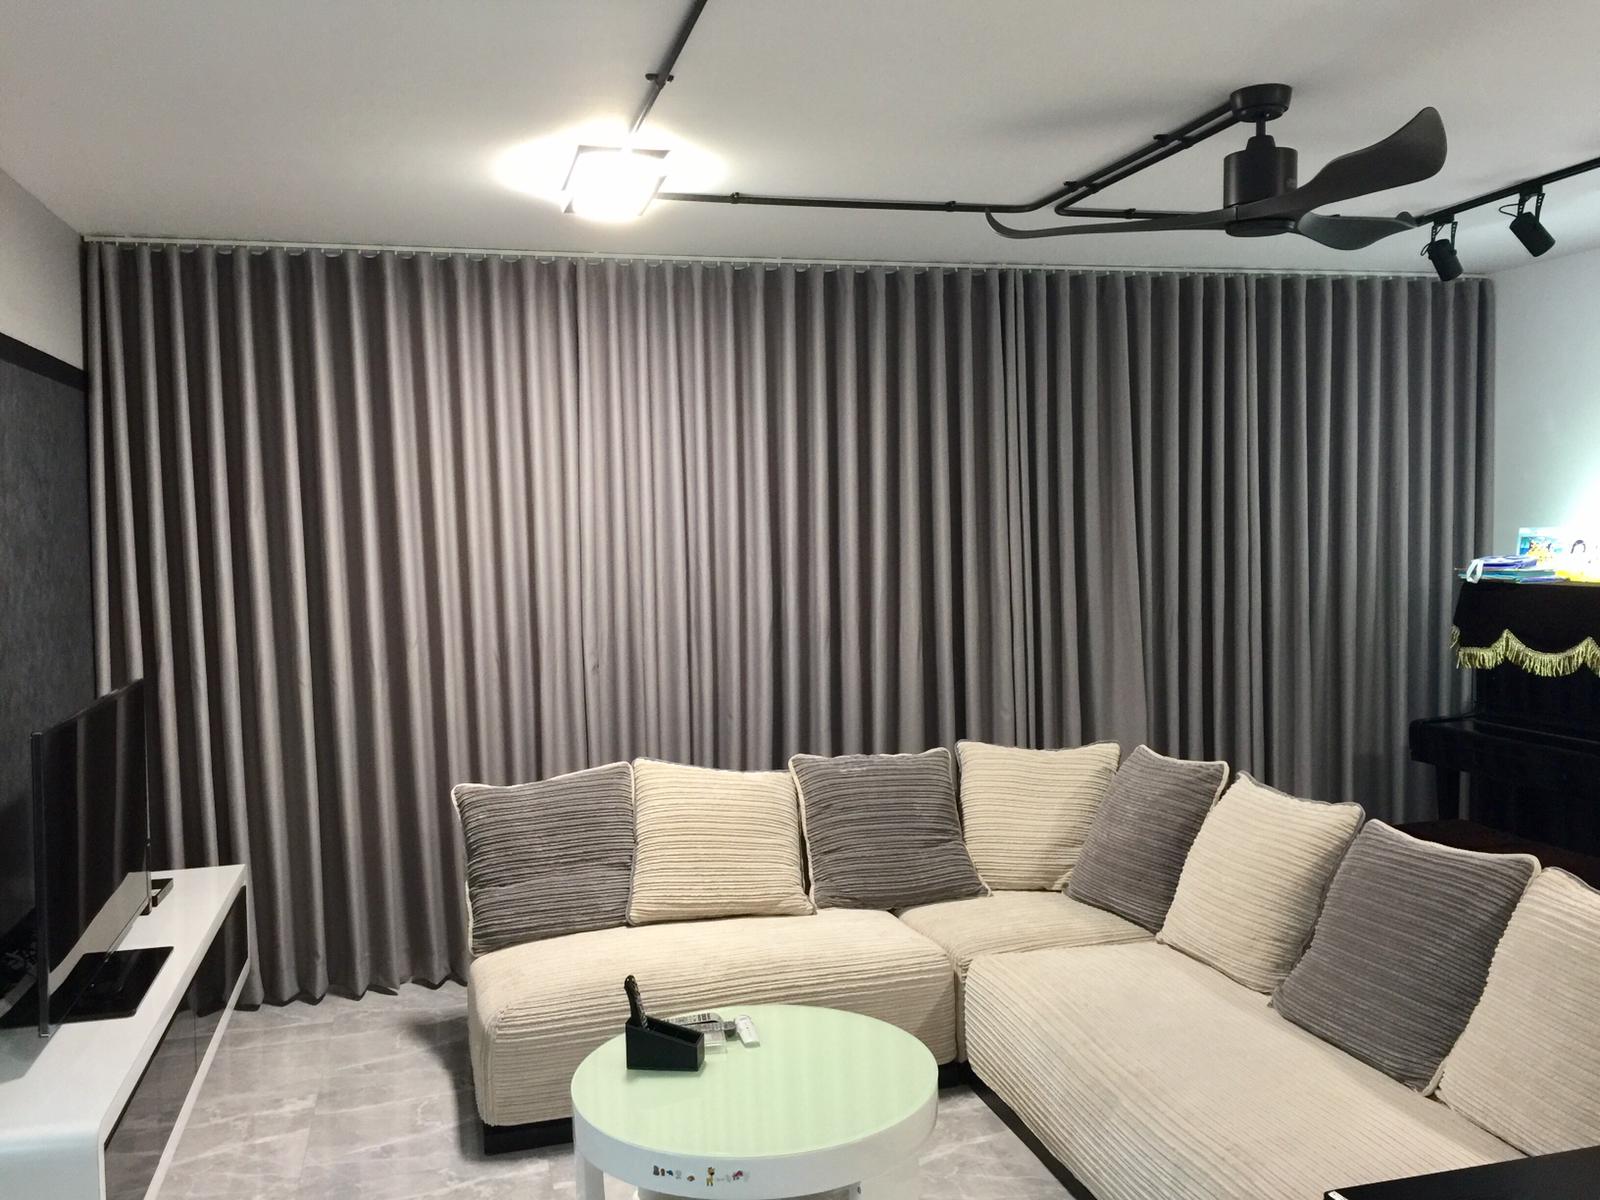 This is a Picture of Day and night curtain picture S-fold, ripple fold curtain for Singapore condo